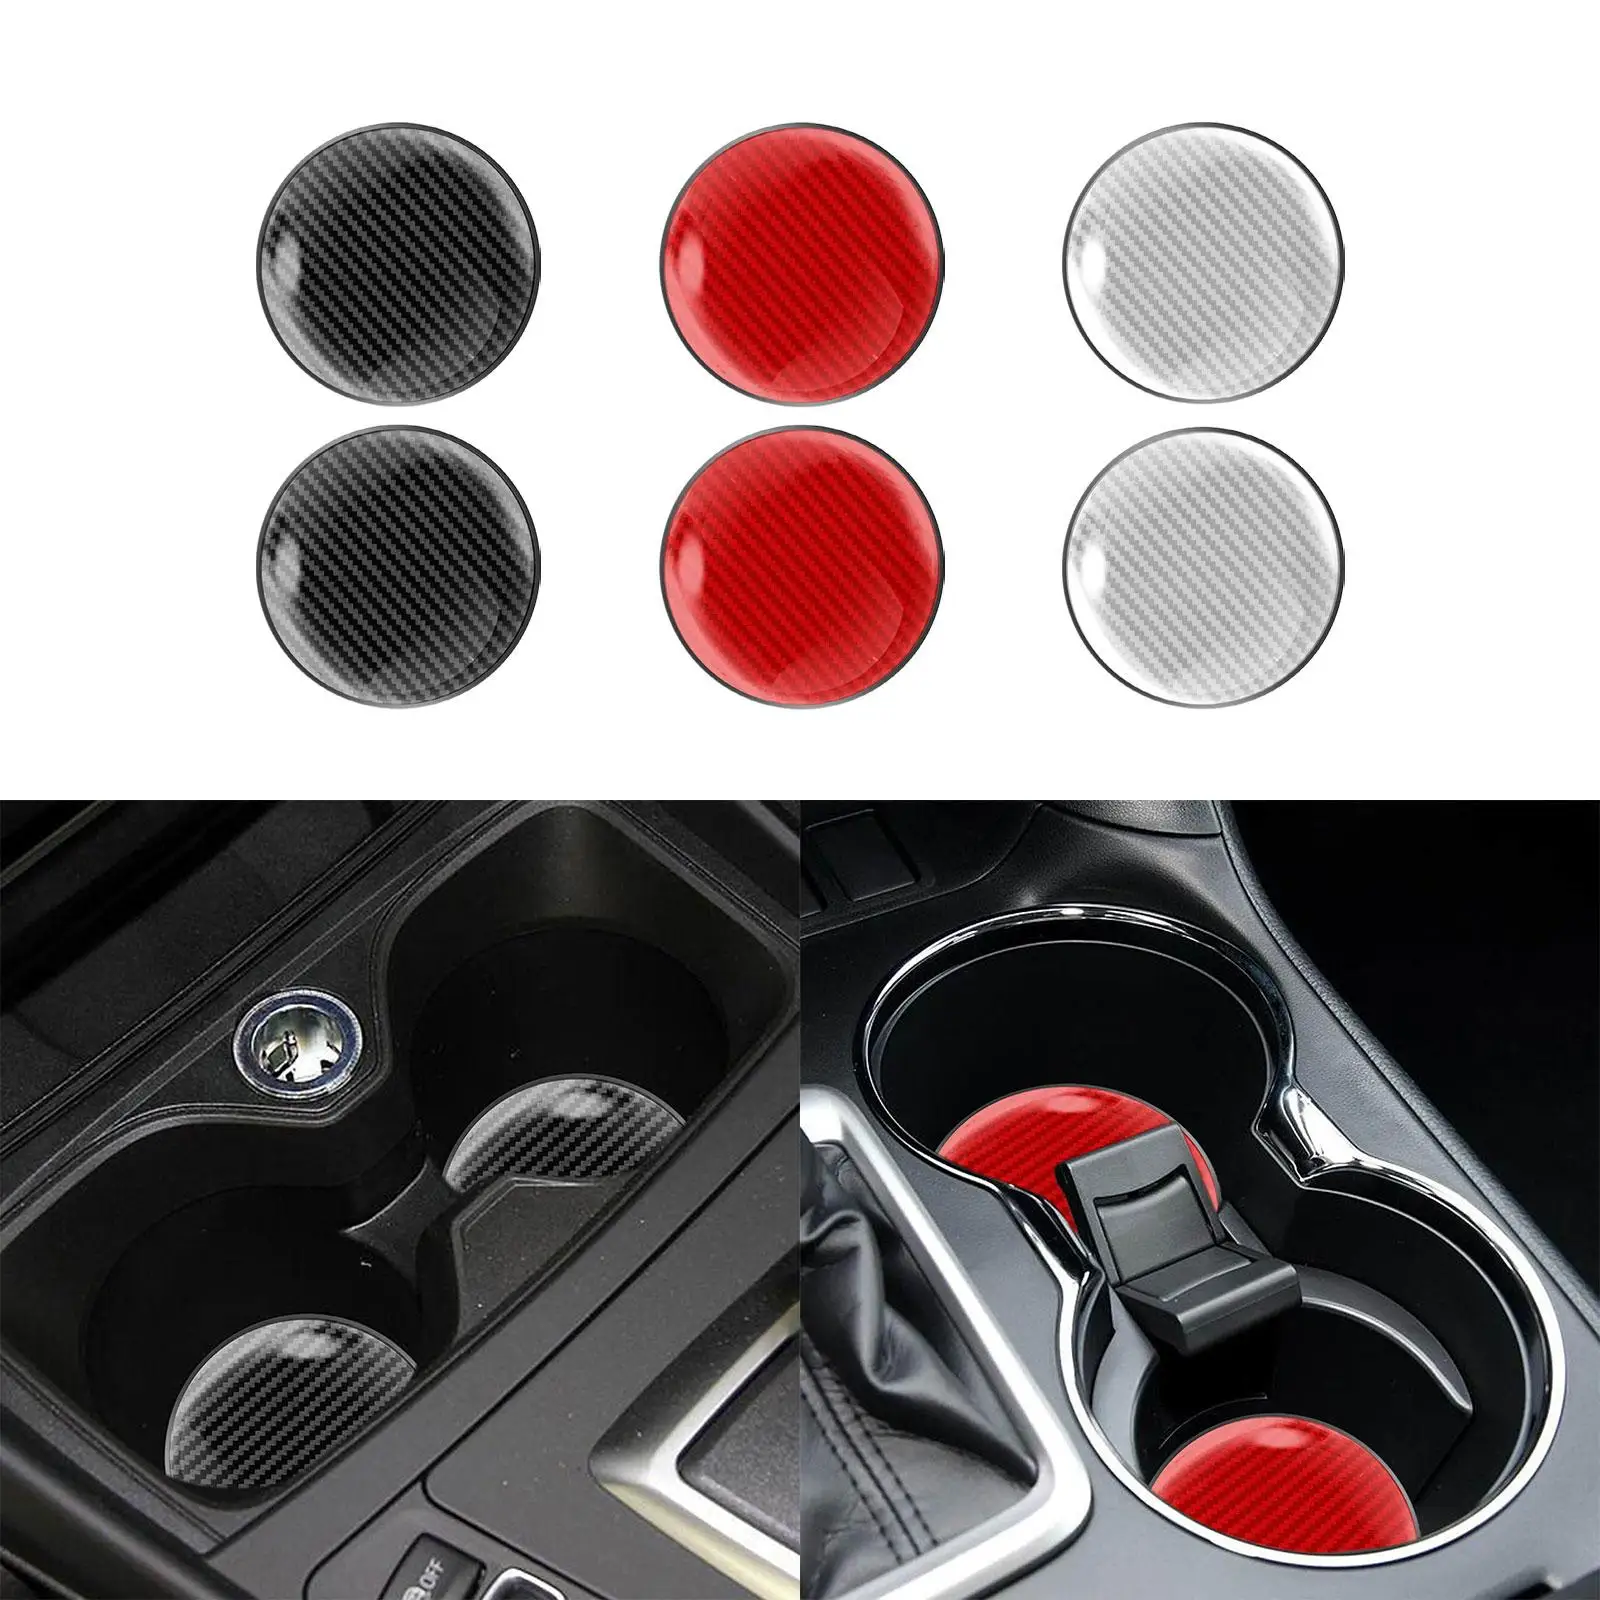 2Pcs Cup Holder Coaster Universal Auto Interior Accessory Waterproof Anti Slip Drink Mat for Outdoor Travel Most Cars Driving